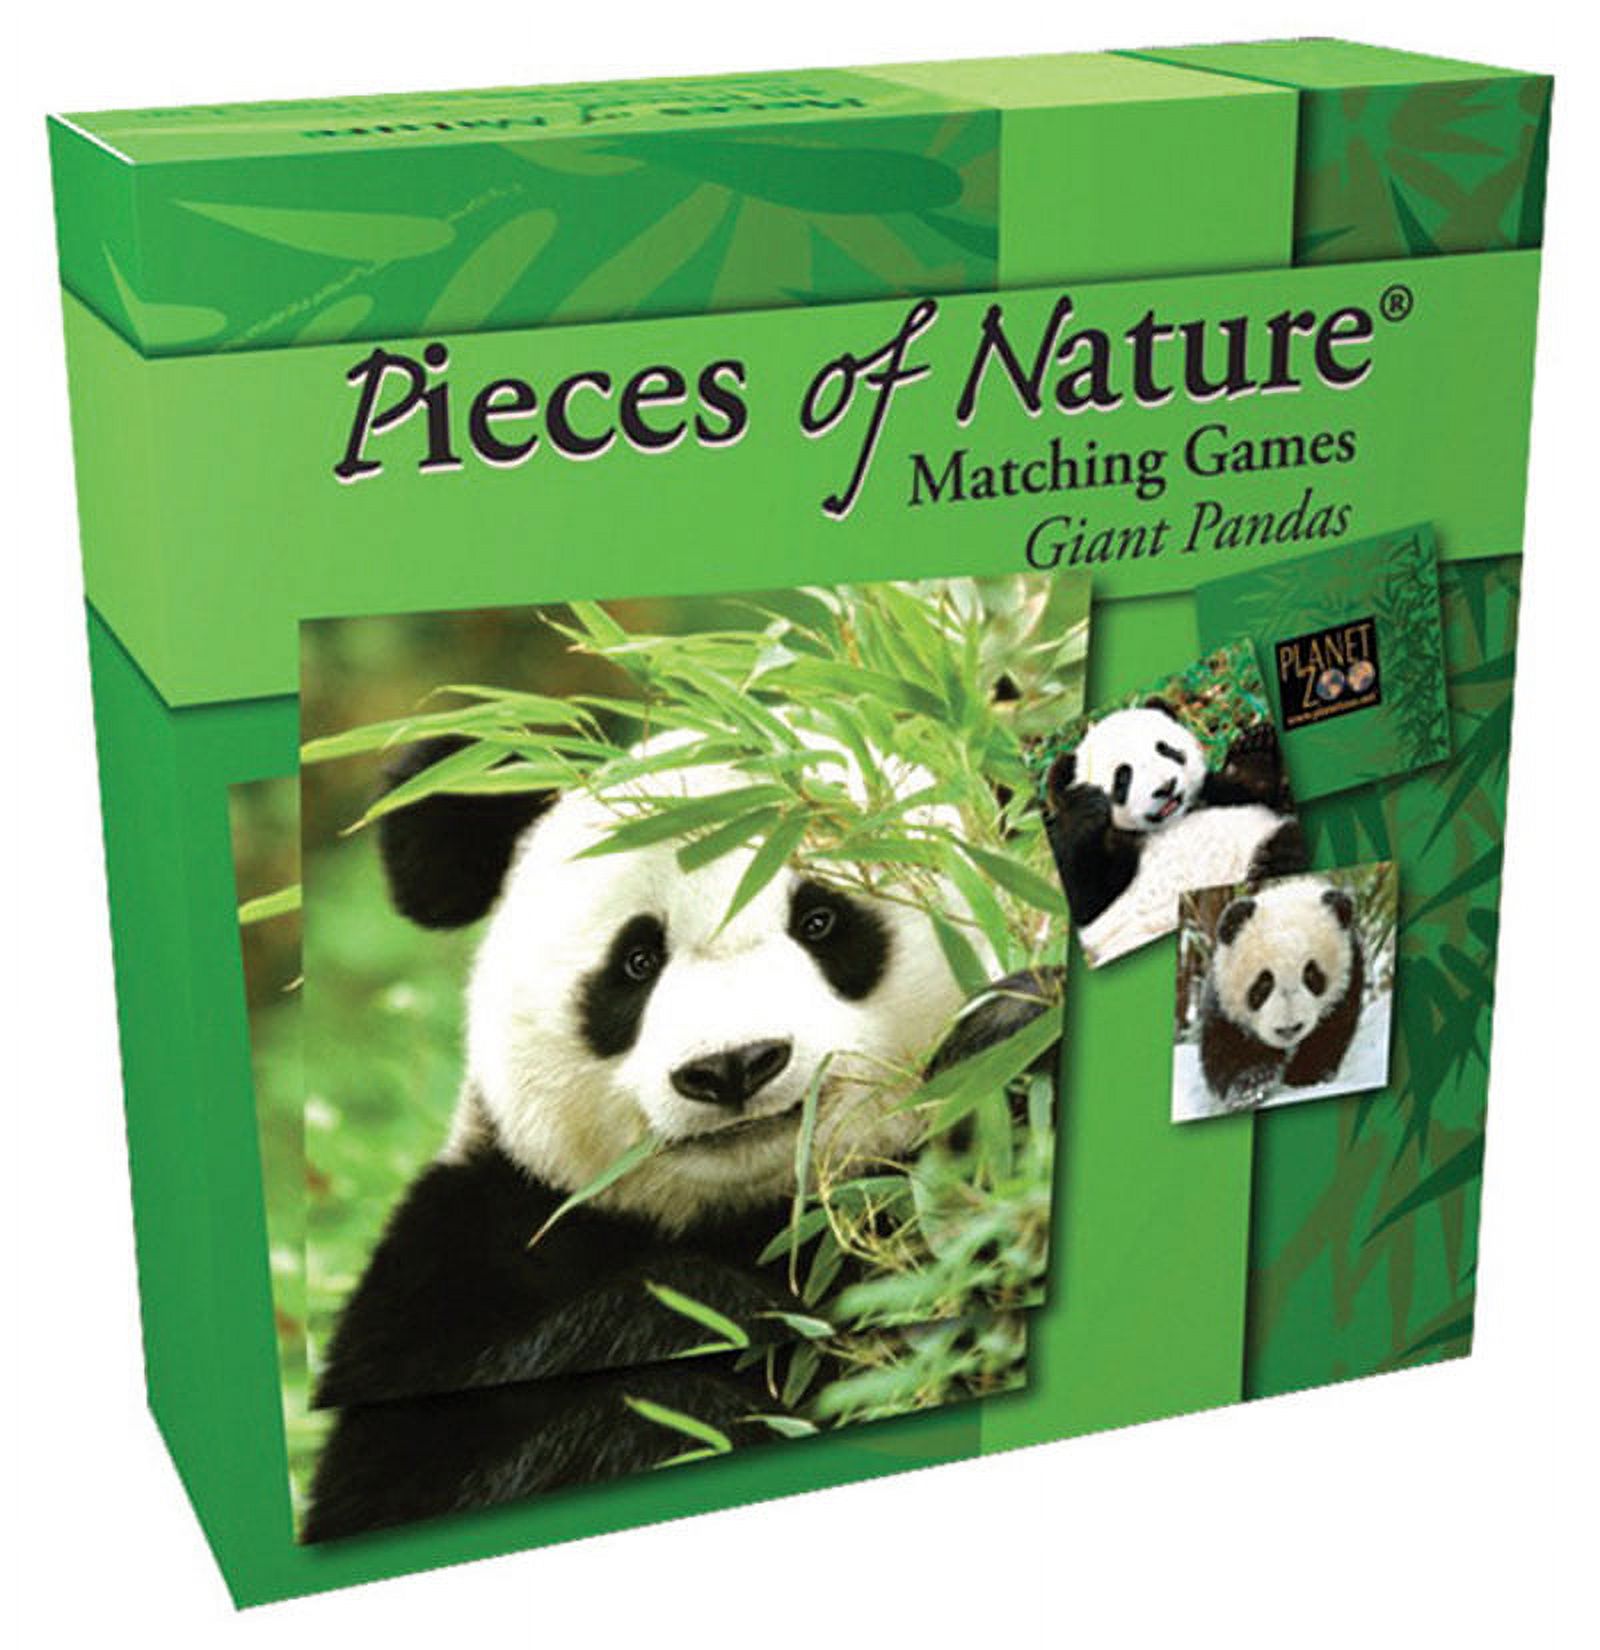 Pieces of Nature Matching Games - Giant Pandas - image 1 of 1